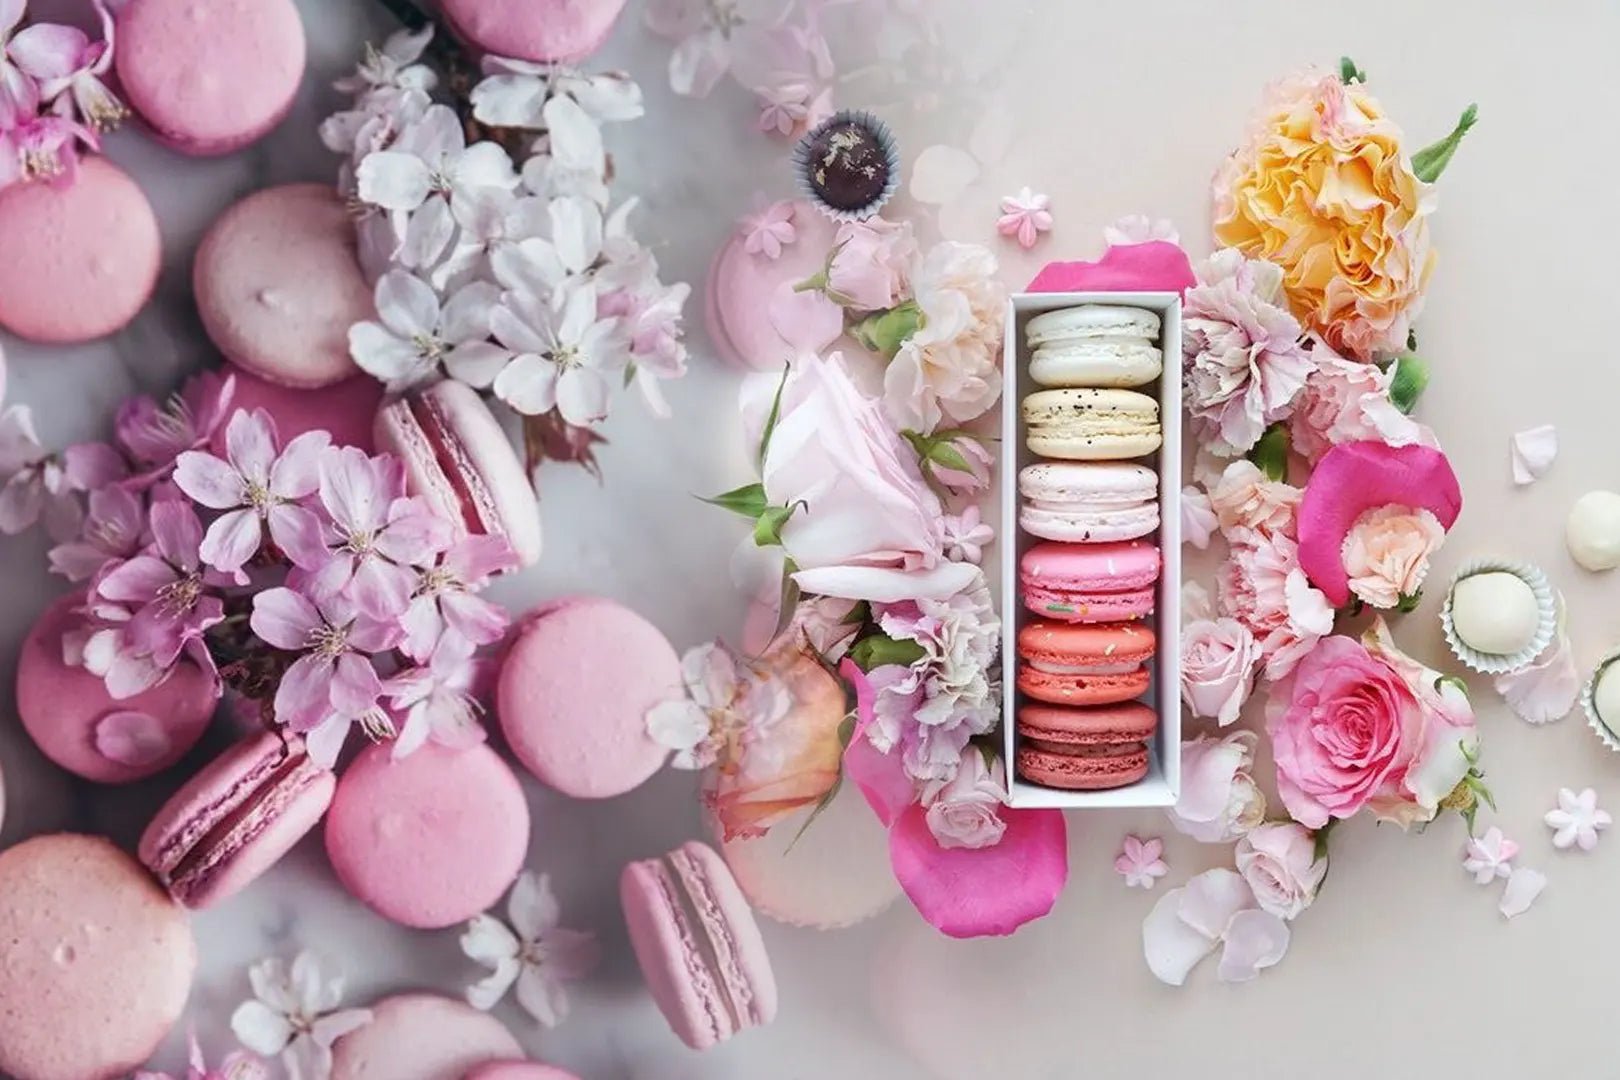 Flowers and Macarons from Cherry Blossom Flower Shop in Los Angeles